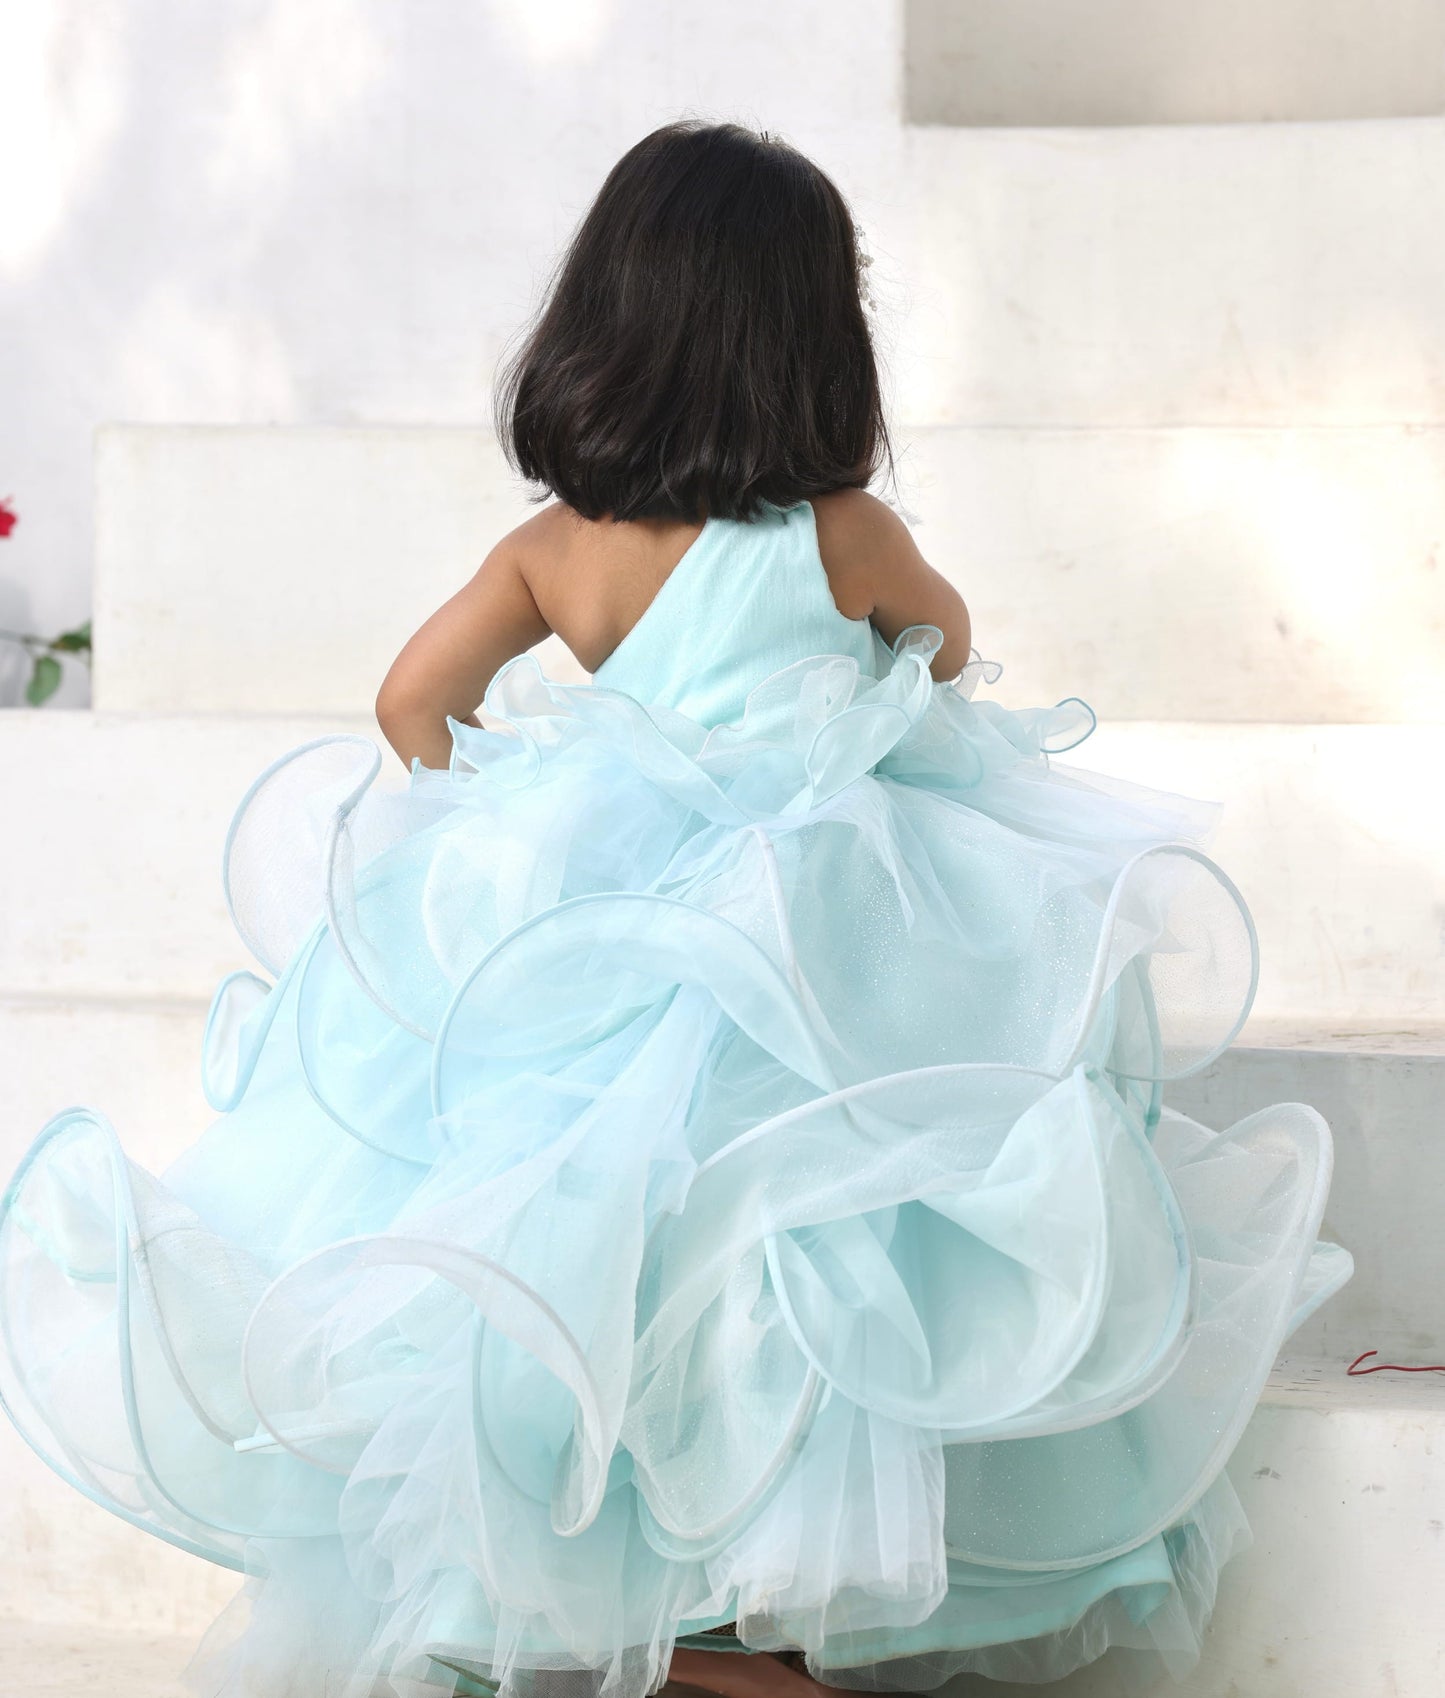 Manufactured by FAYON KIDS (Noida, U.P) Powder Blue Dream Gown for Girls